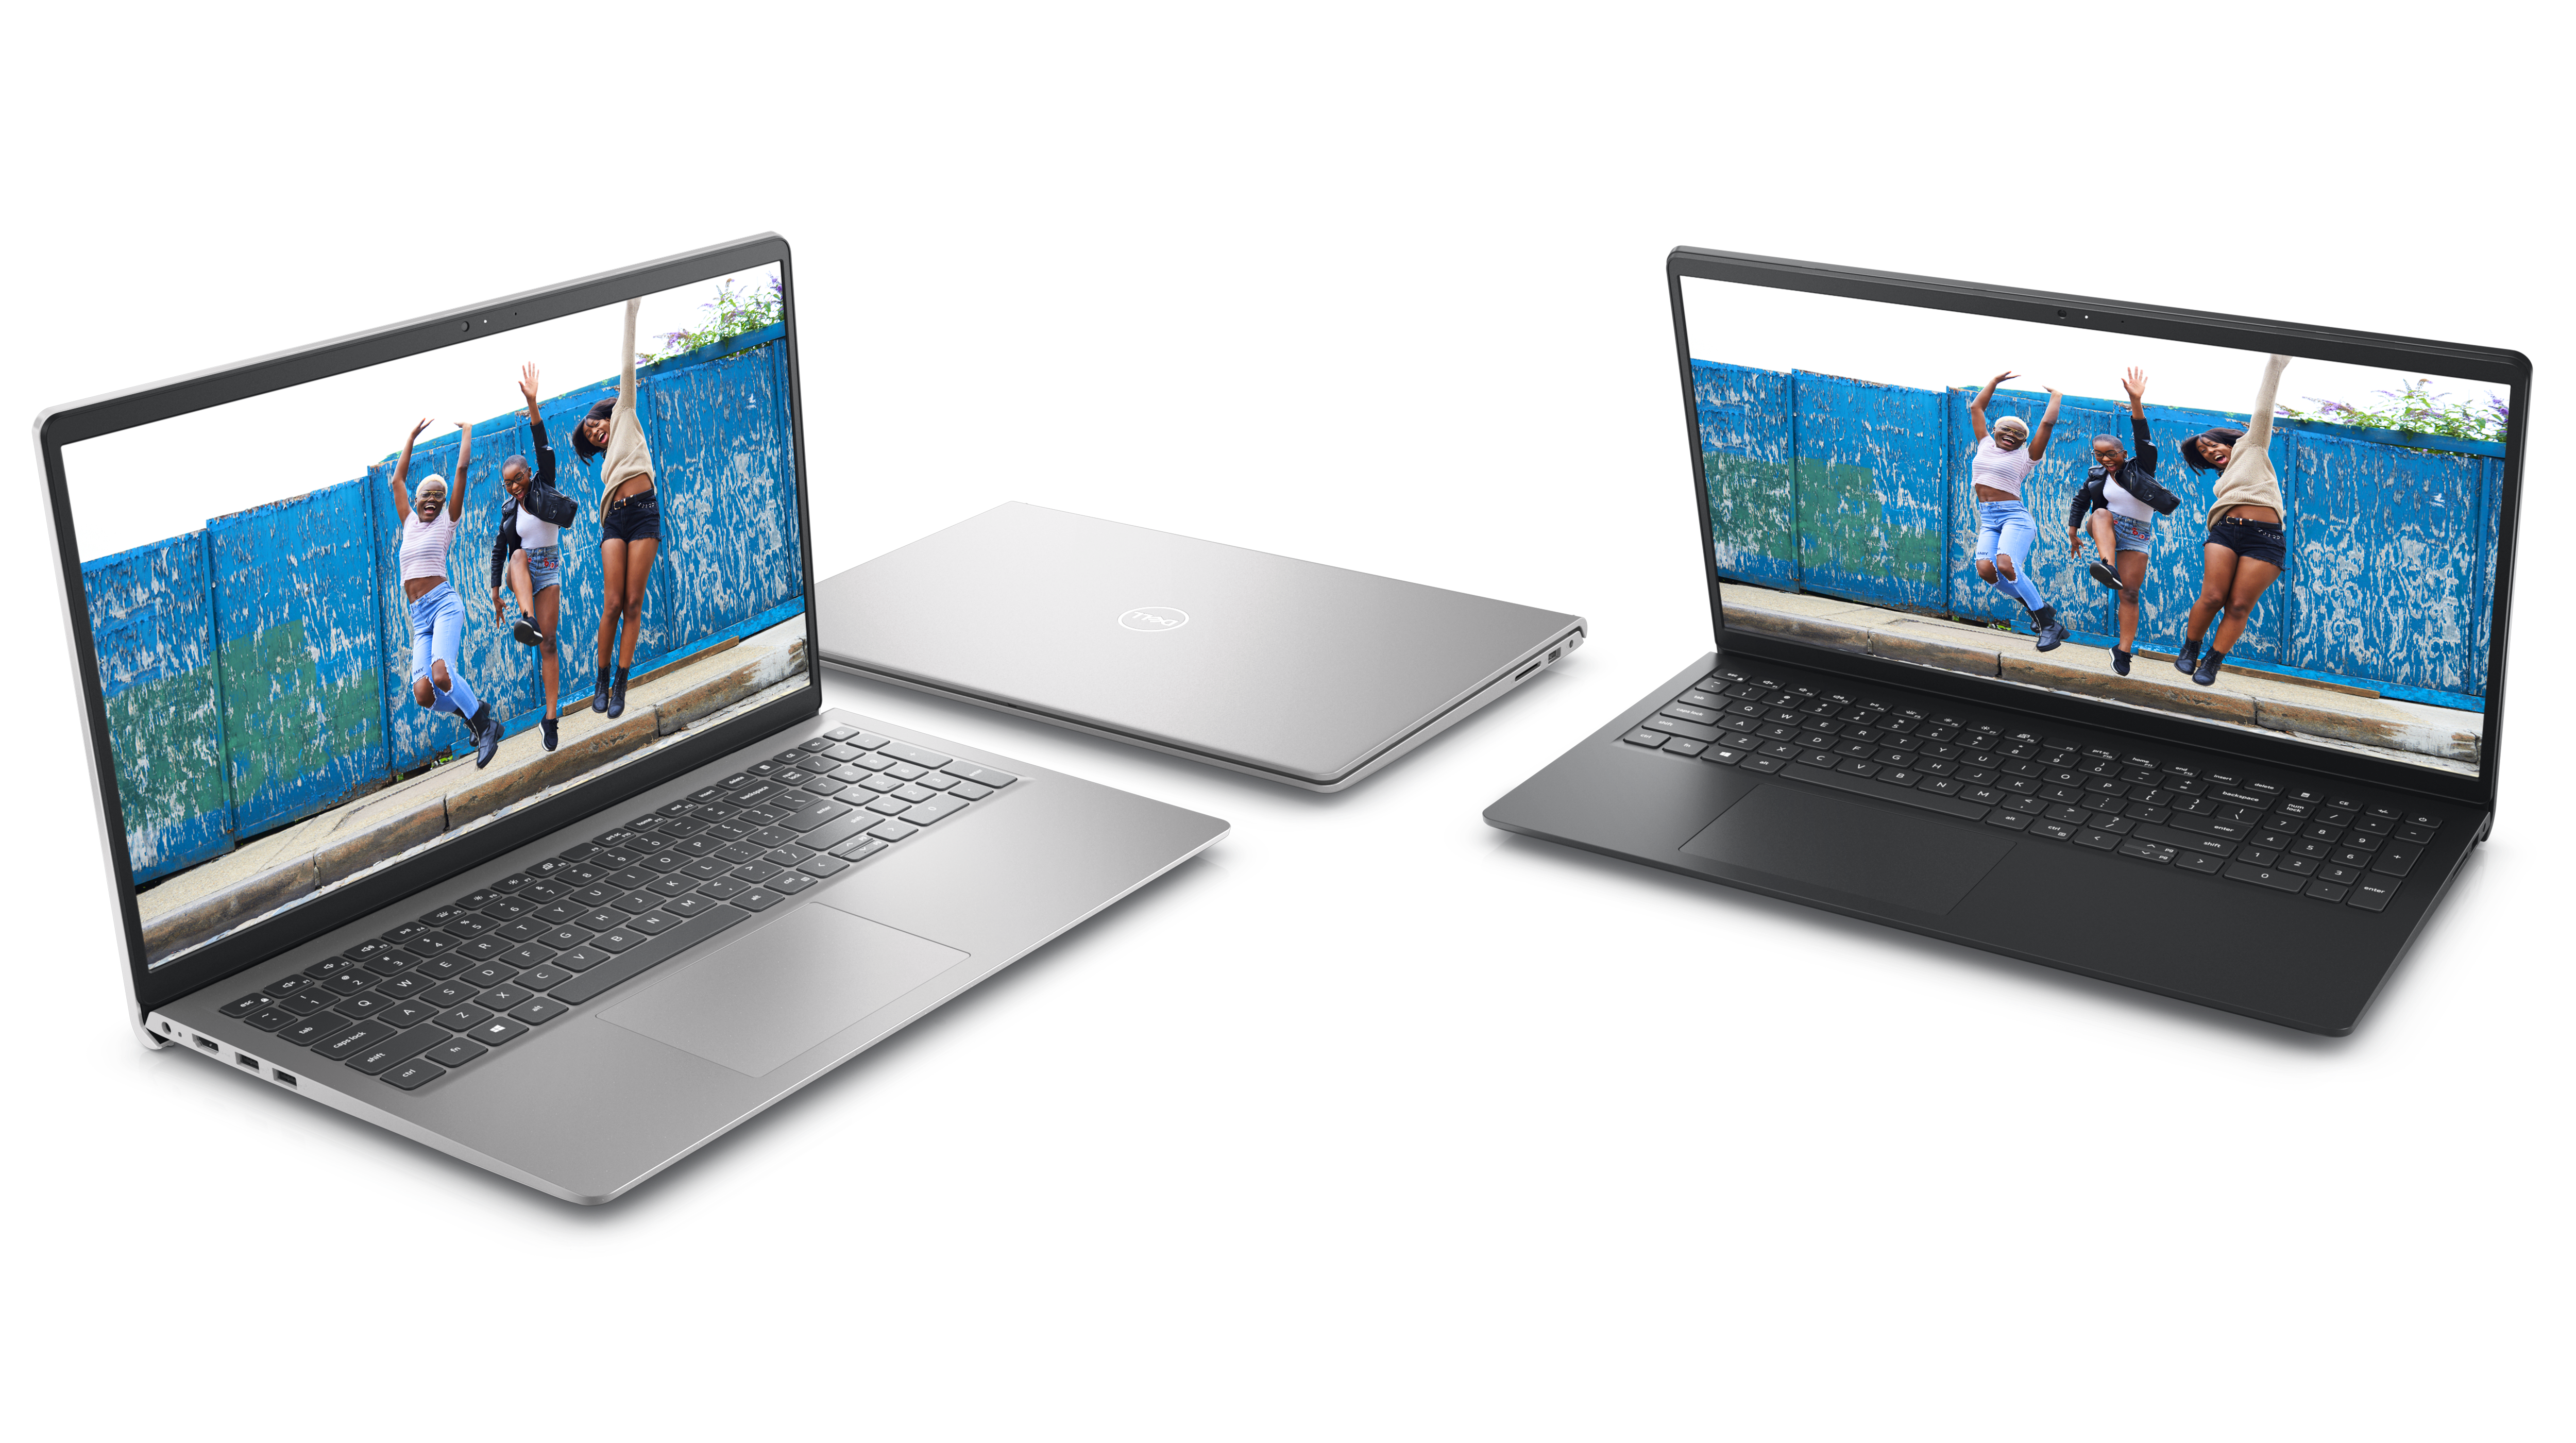 Picture of three Dell Inspiron 15 3520 Laptops placed side by side, two opened and one closed.